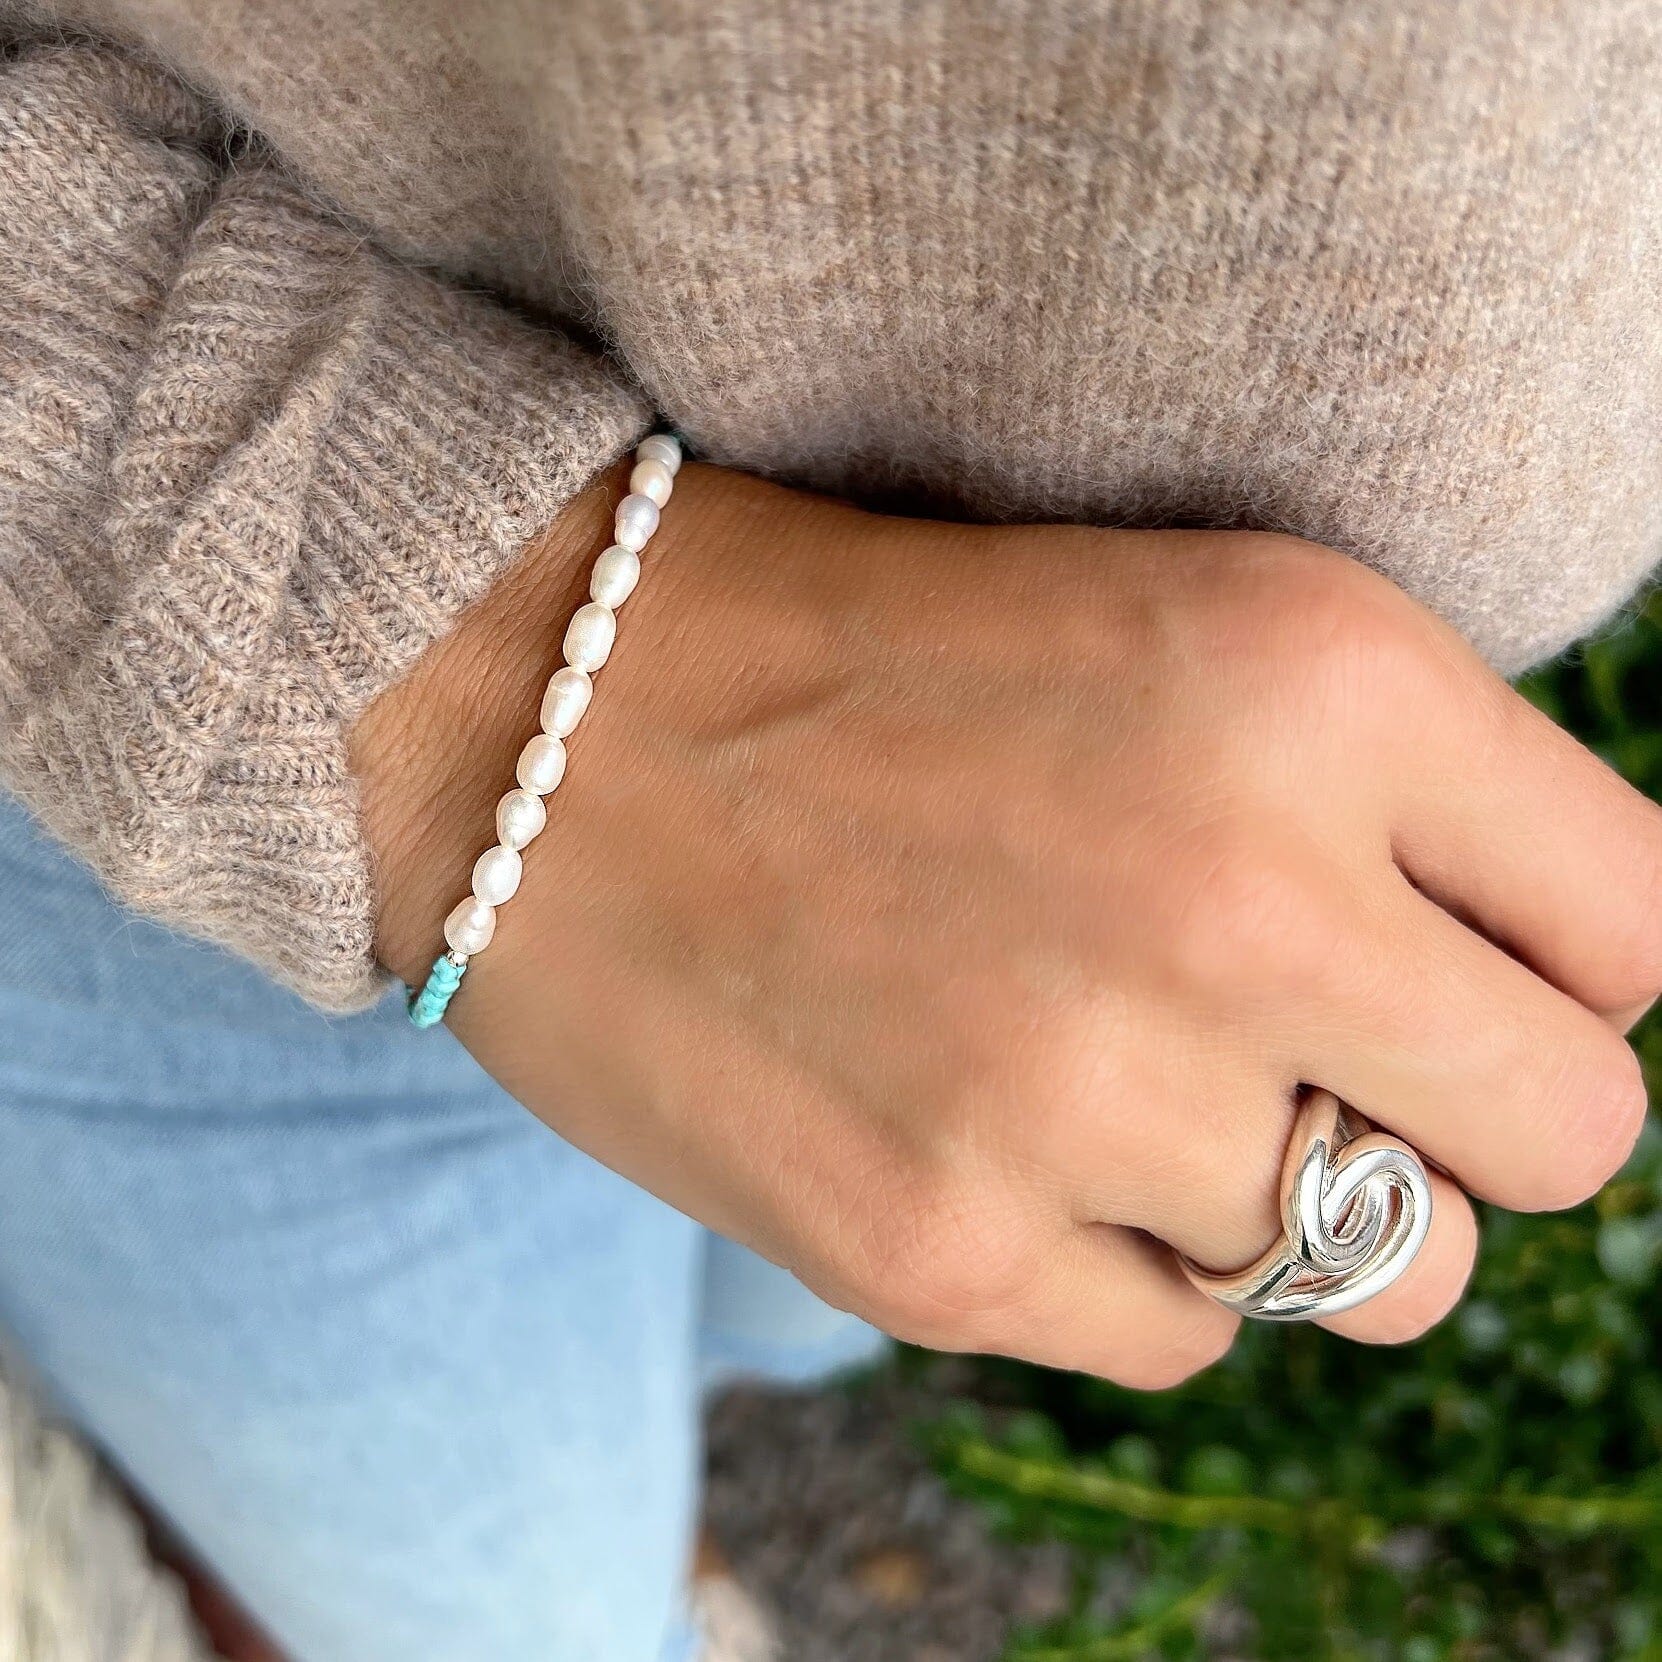 Daydreamer Bracelet paired with Sisters Ring